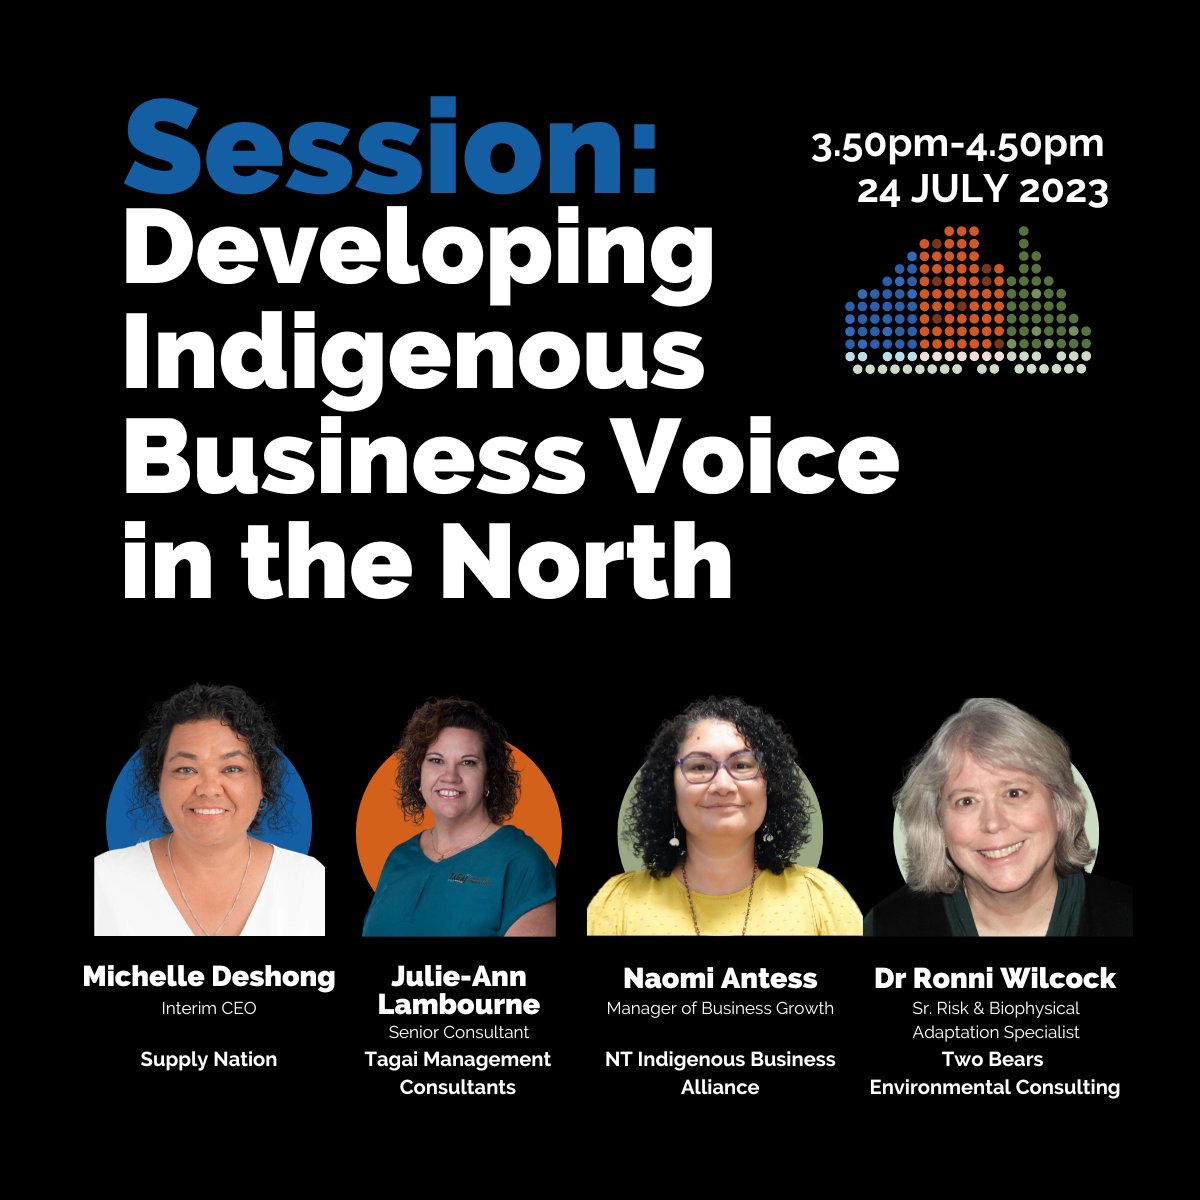 Seats are filling fast. 🏃 Part of this year's conference program features a session on 'Developing Indigenous Business Voice in the North'. ➡️ hubs.li/Q01WkY7W0 ✔️ Michelle Deshong @SupplyNation ✔️ Julie-Ann Lambourne ✔️ Naomi Antess ✔️ Ronni Wilcock @TwoBearsEnviro1